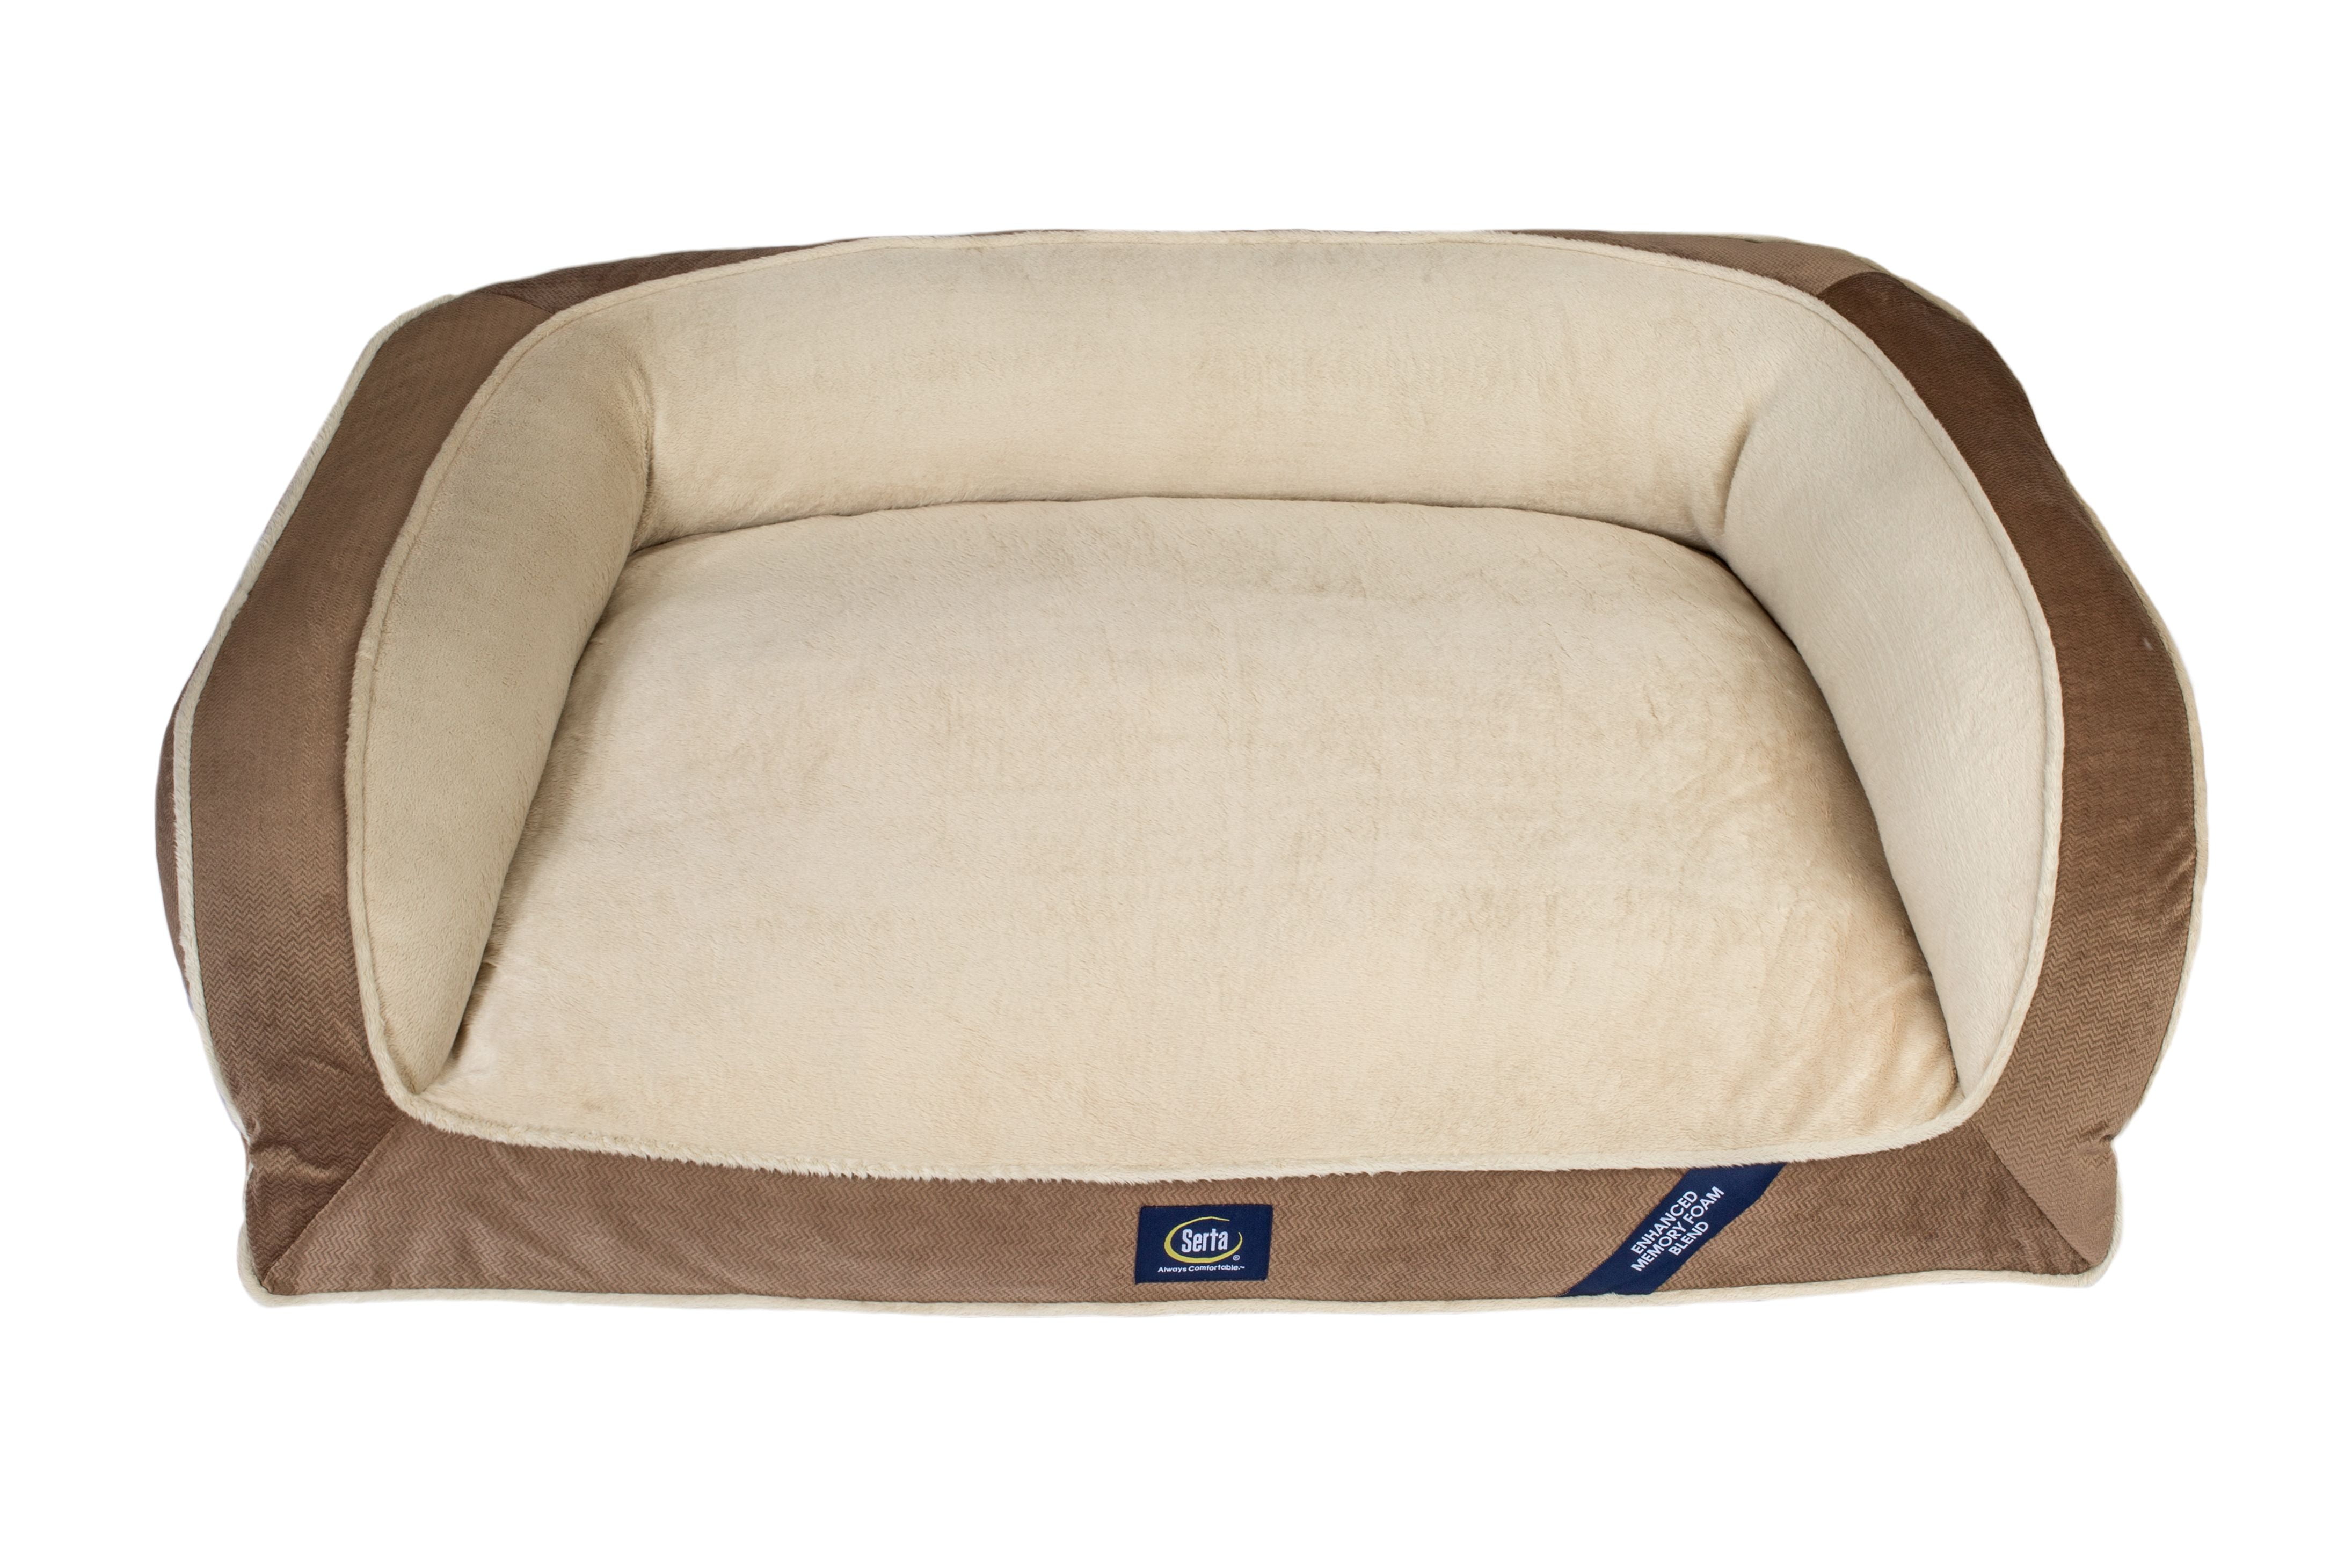 couch pet bed